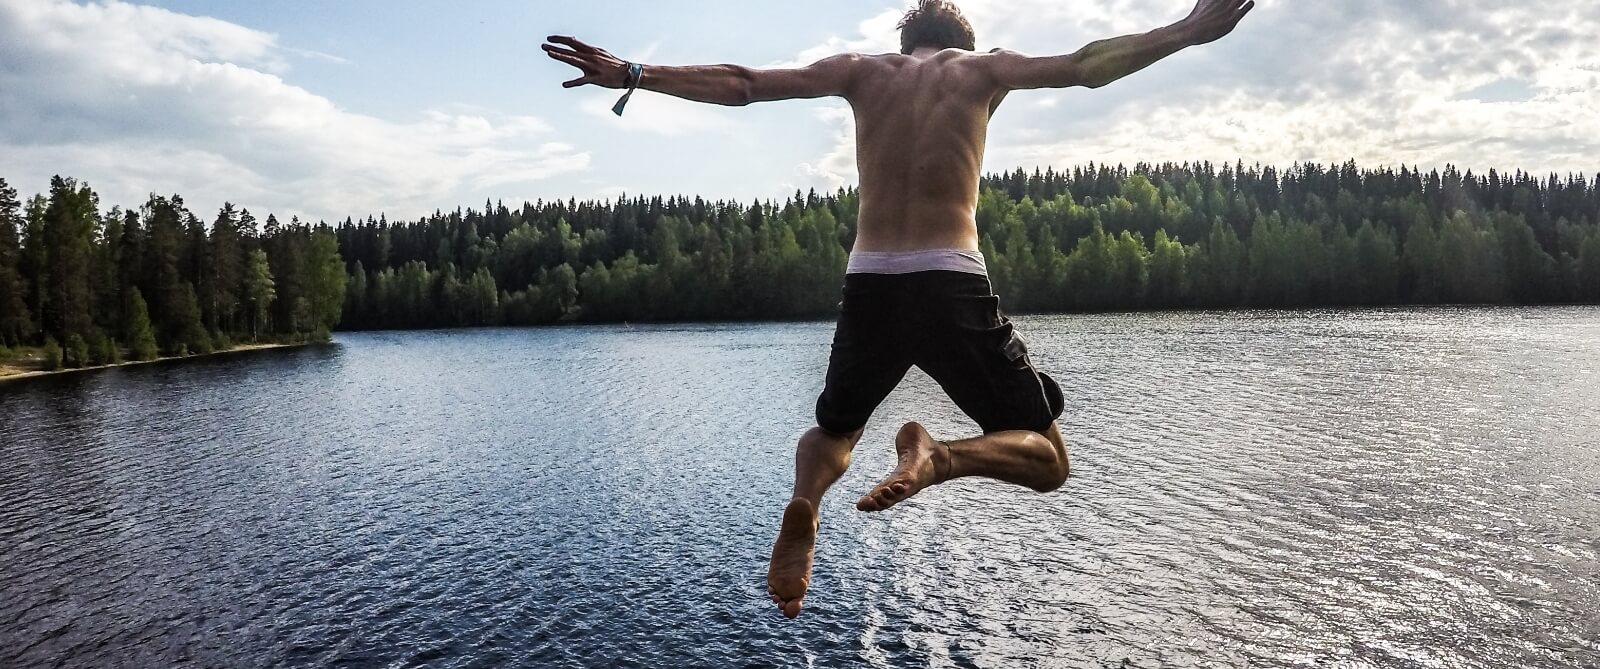 Person jumping into a lake